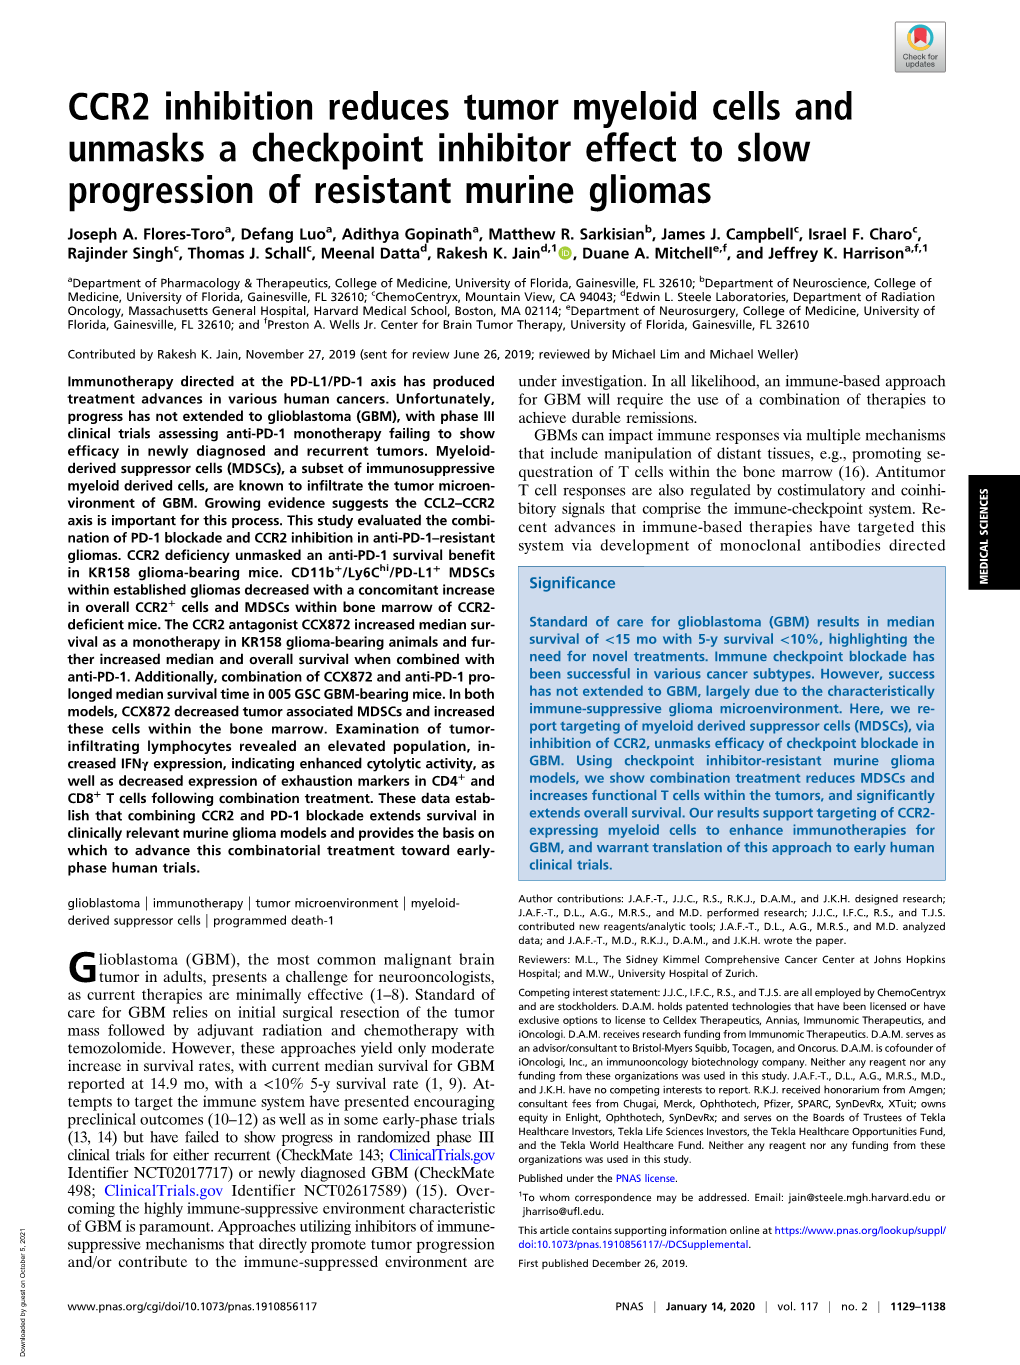 CCR2 Inhibition Reduces Tumor Myeloid Cells and Unmasks a Checkpoint Inhibitor Effect to Slow Progression of Resistant Murine Gliomas